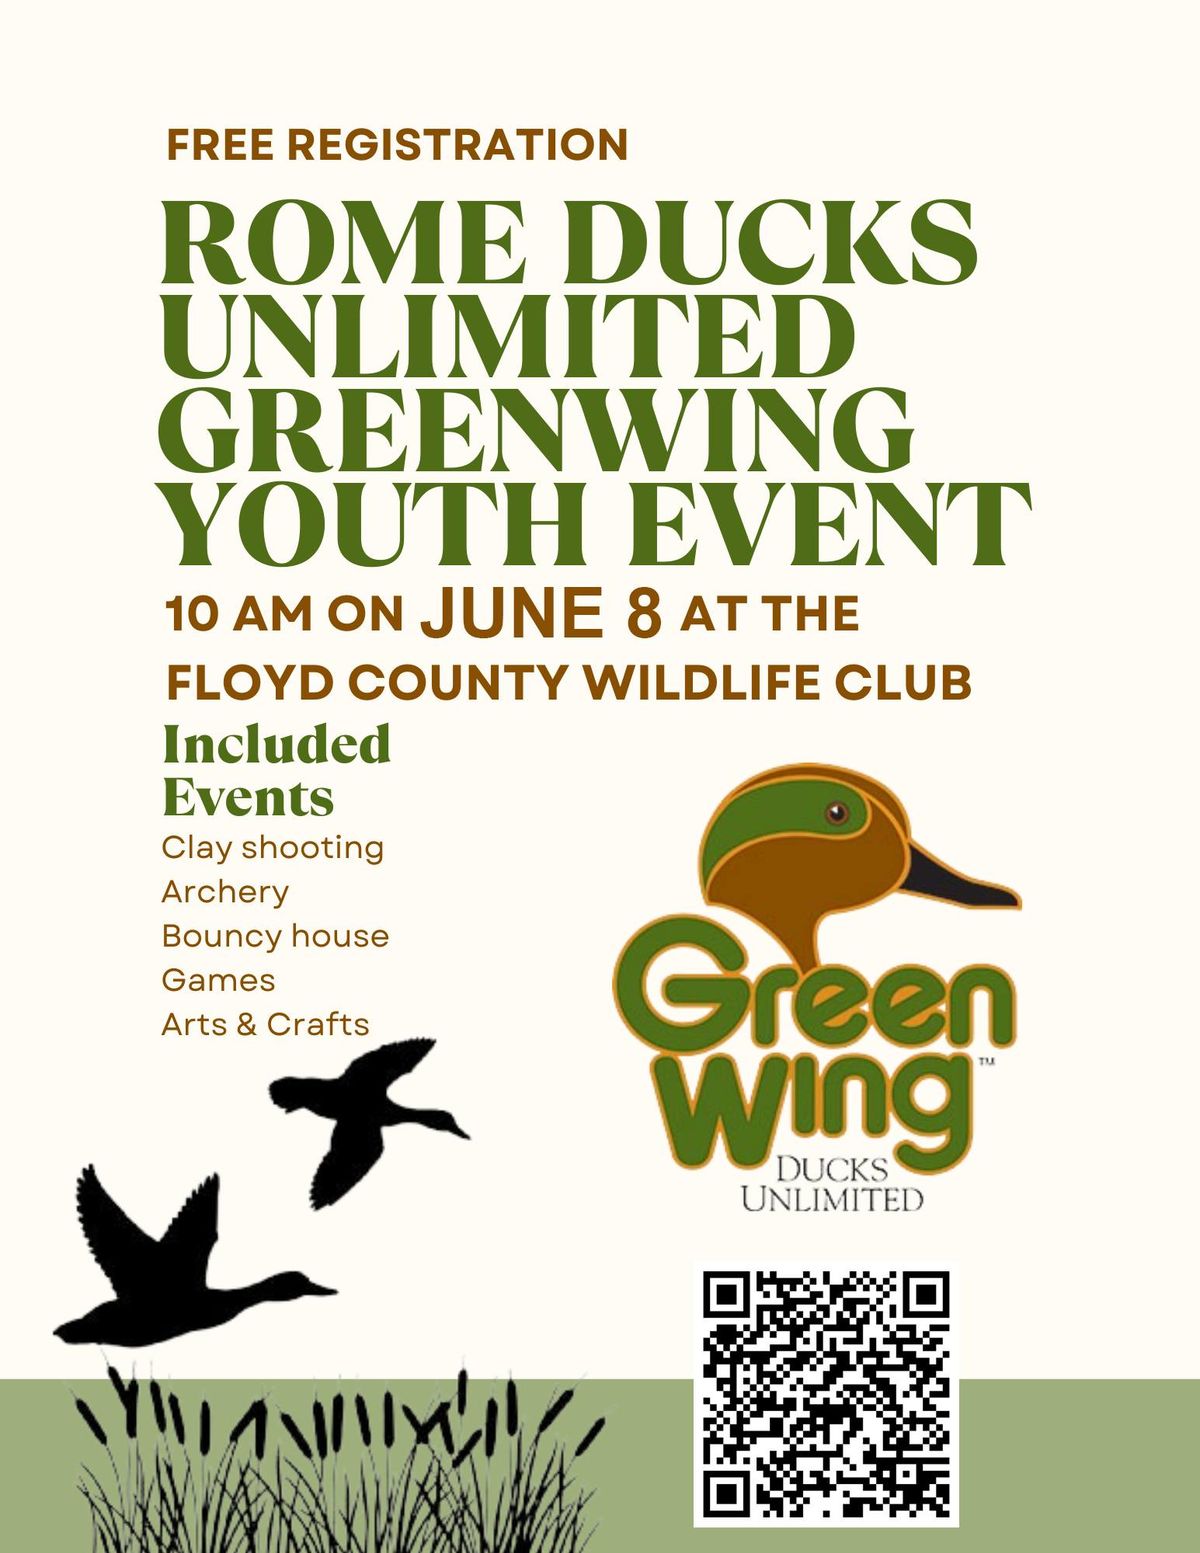 ROME DUCKS Unlimited Greenwing Youth Event